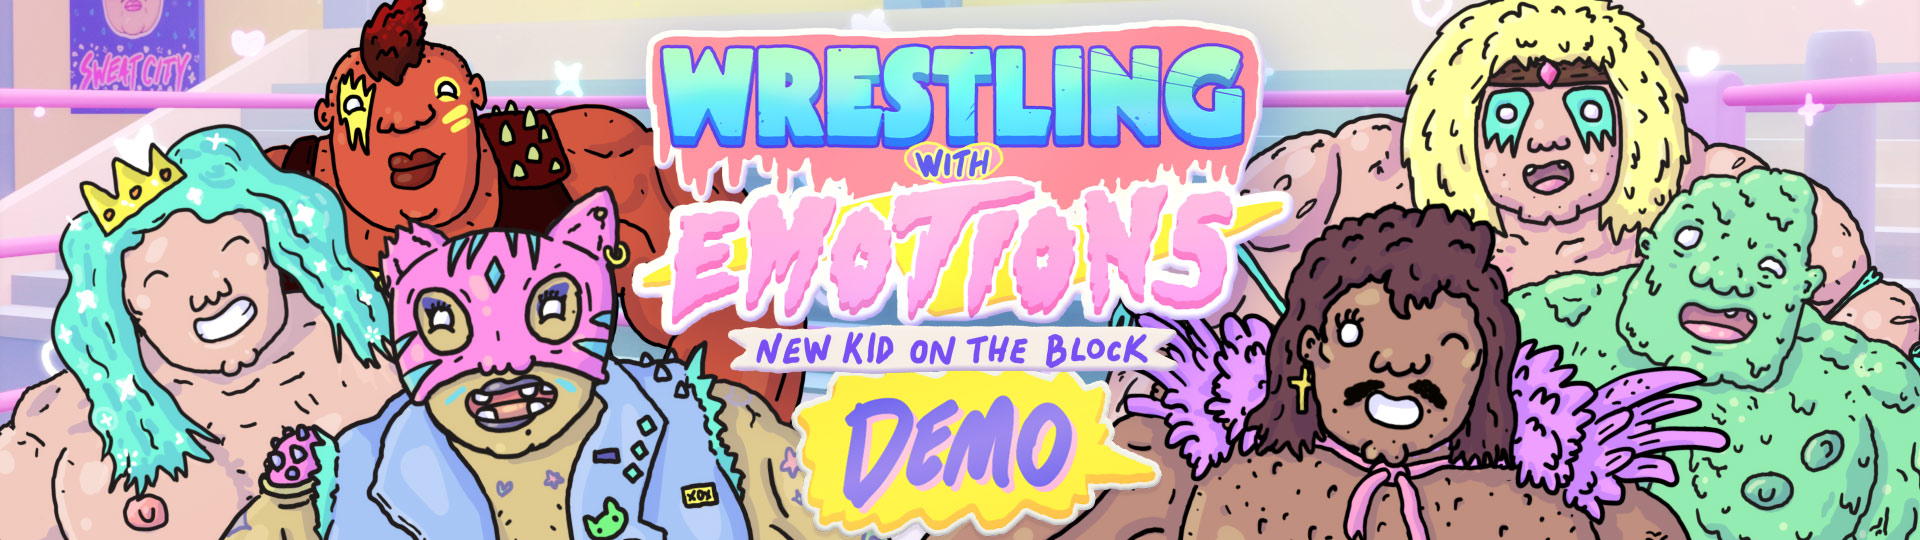 Wrestling With Emotions 2 - Demo